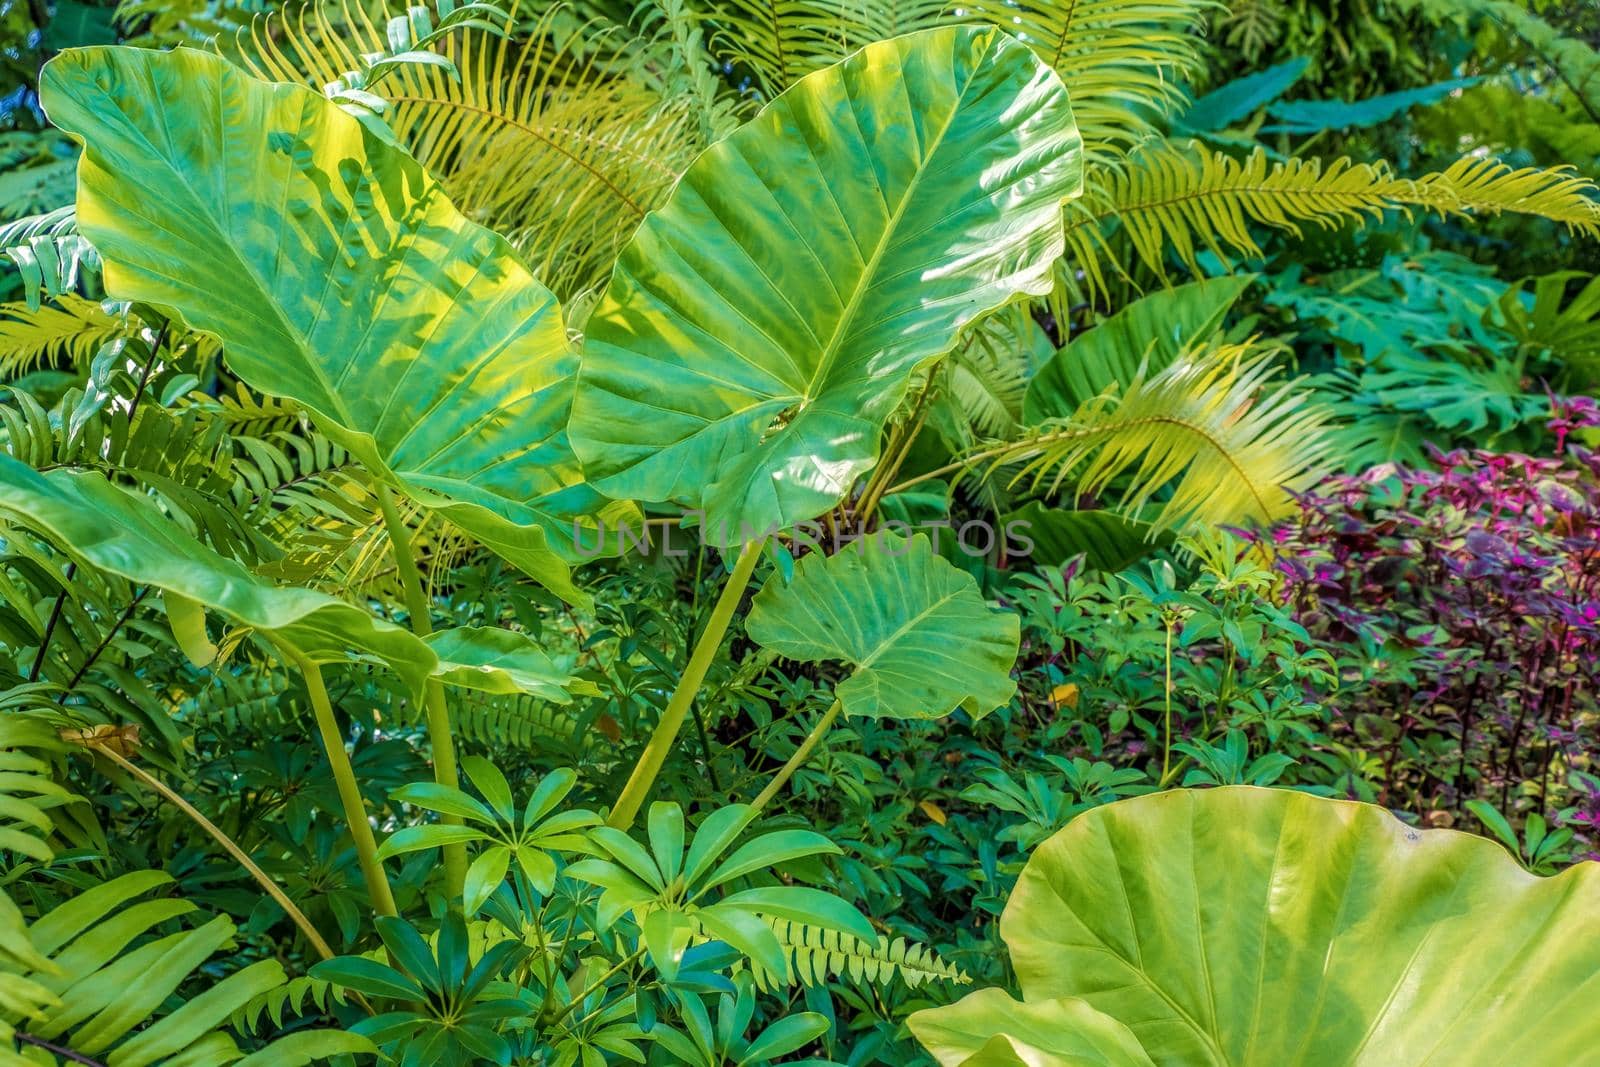 Green nature of Fern plant and trees in tropical garden nature background.